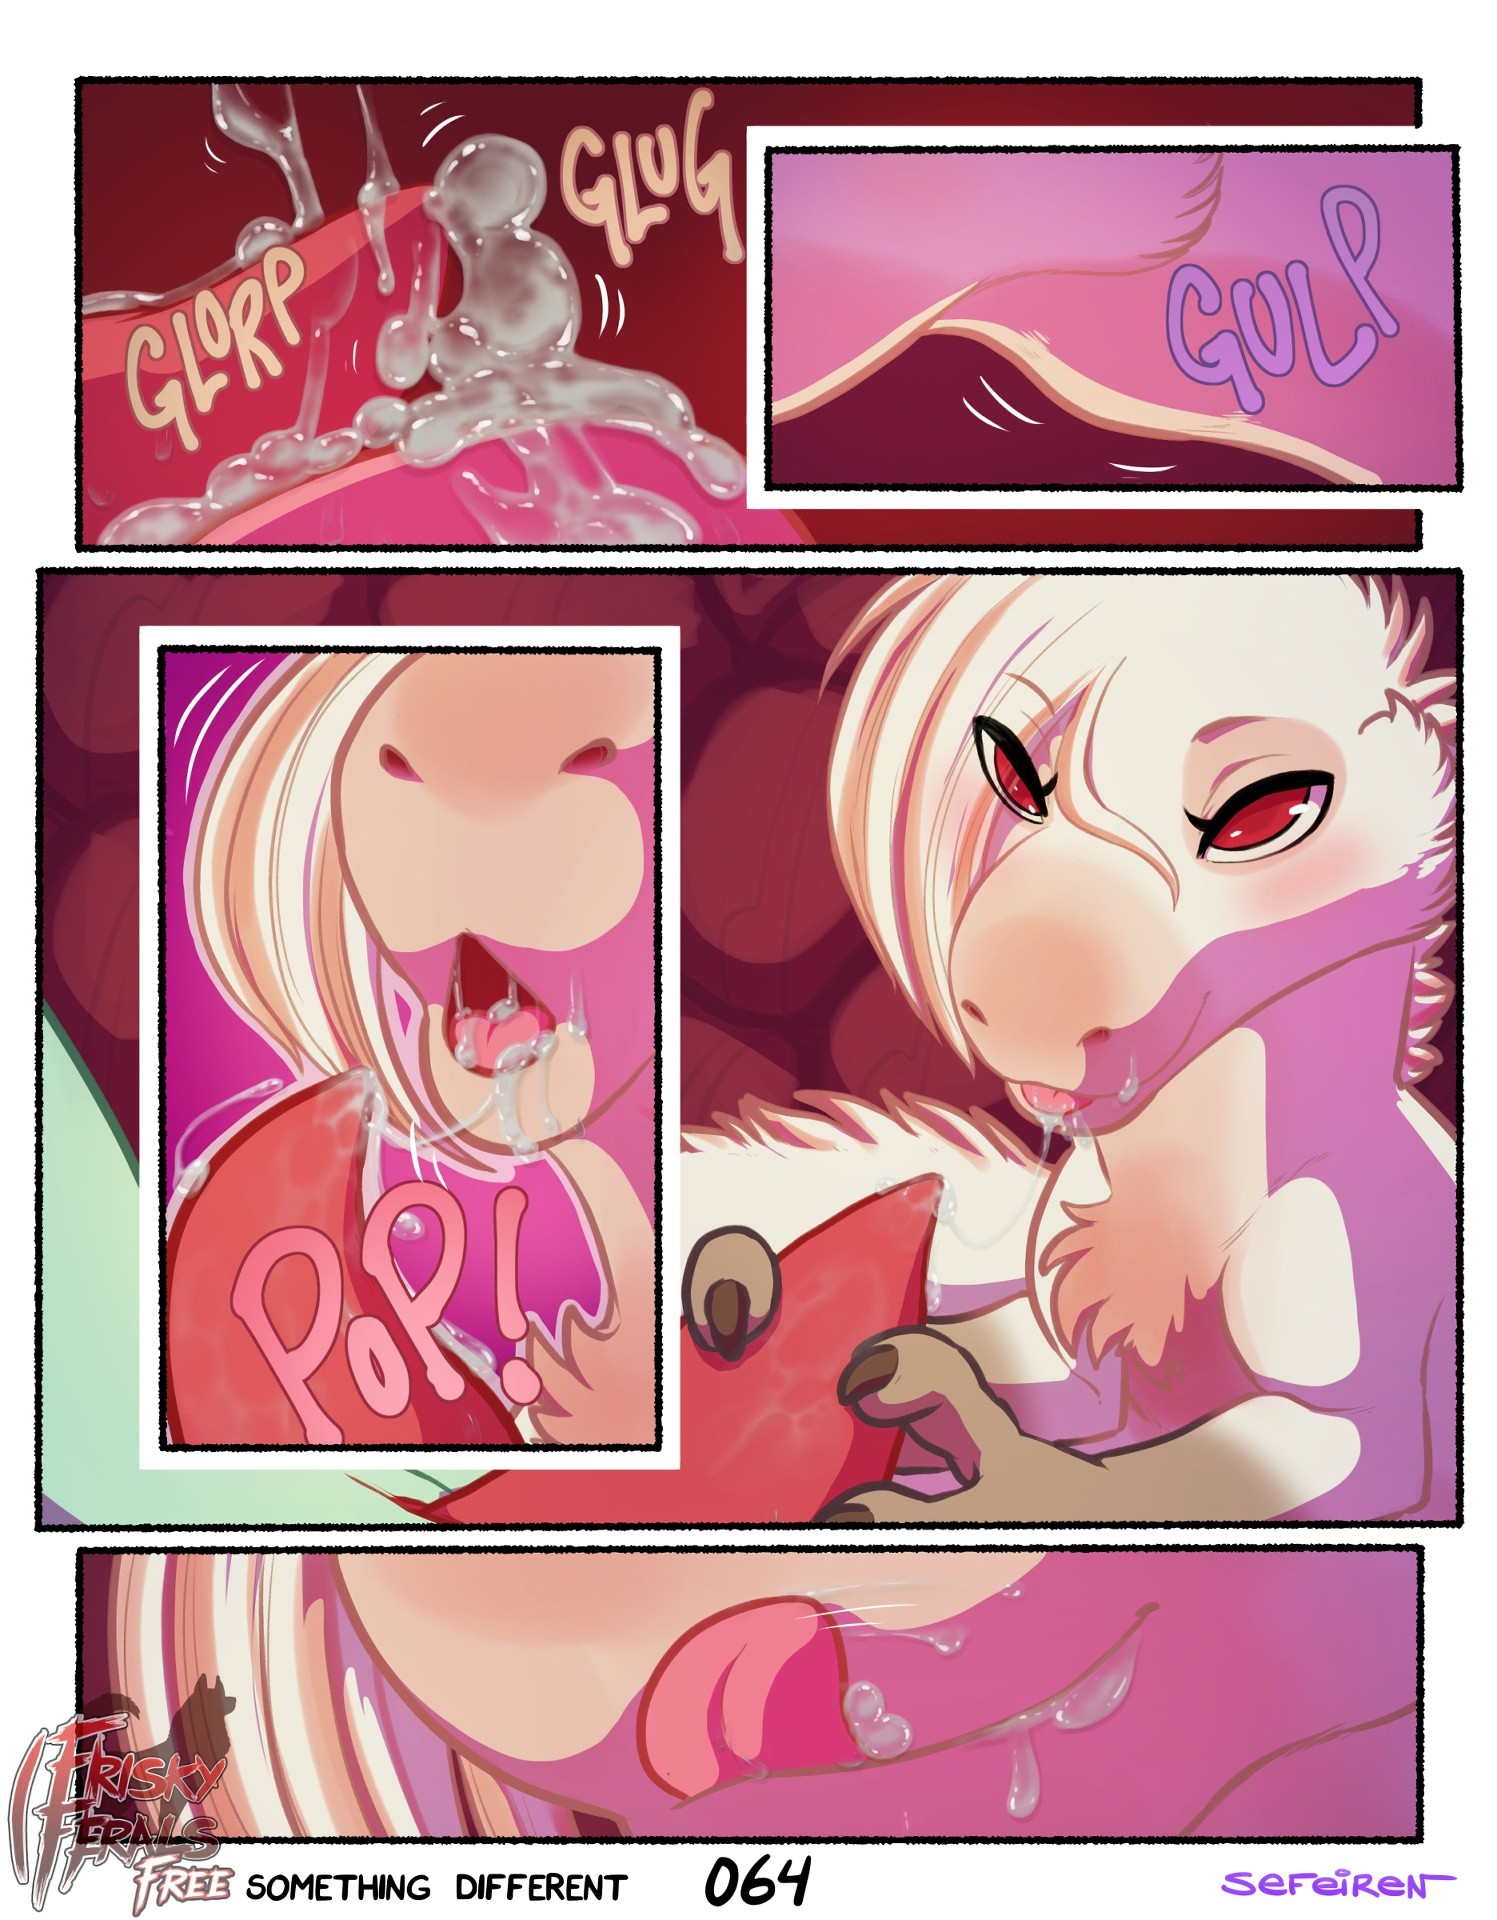 Frisky Ferals - Something Different porn comic picture 64